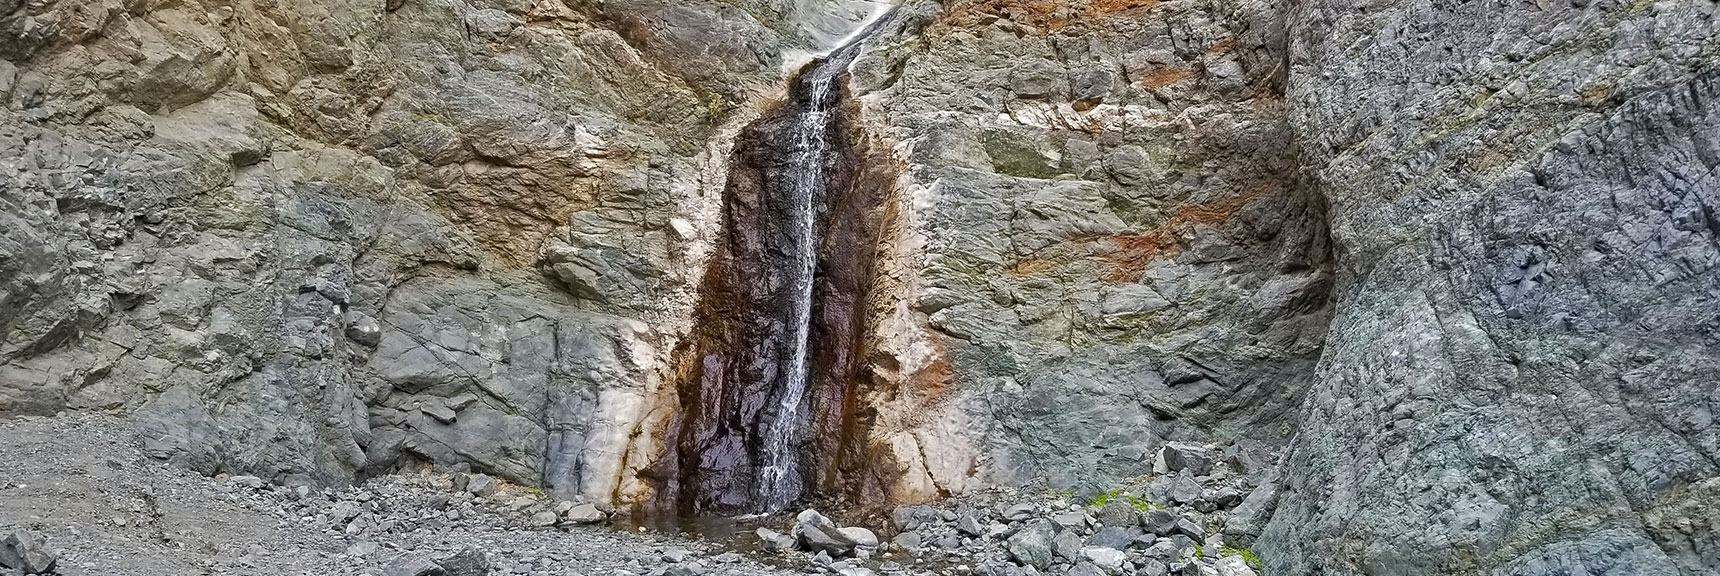 Spring Fed Waterfall Flows Year-Round. | Willow Canyon | Death Valley National Park, California